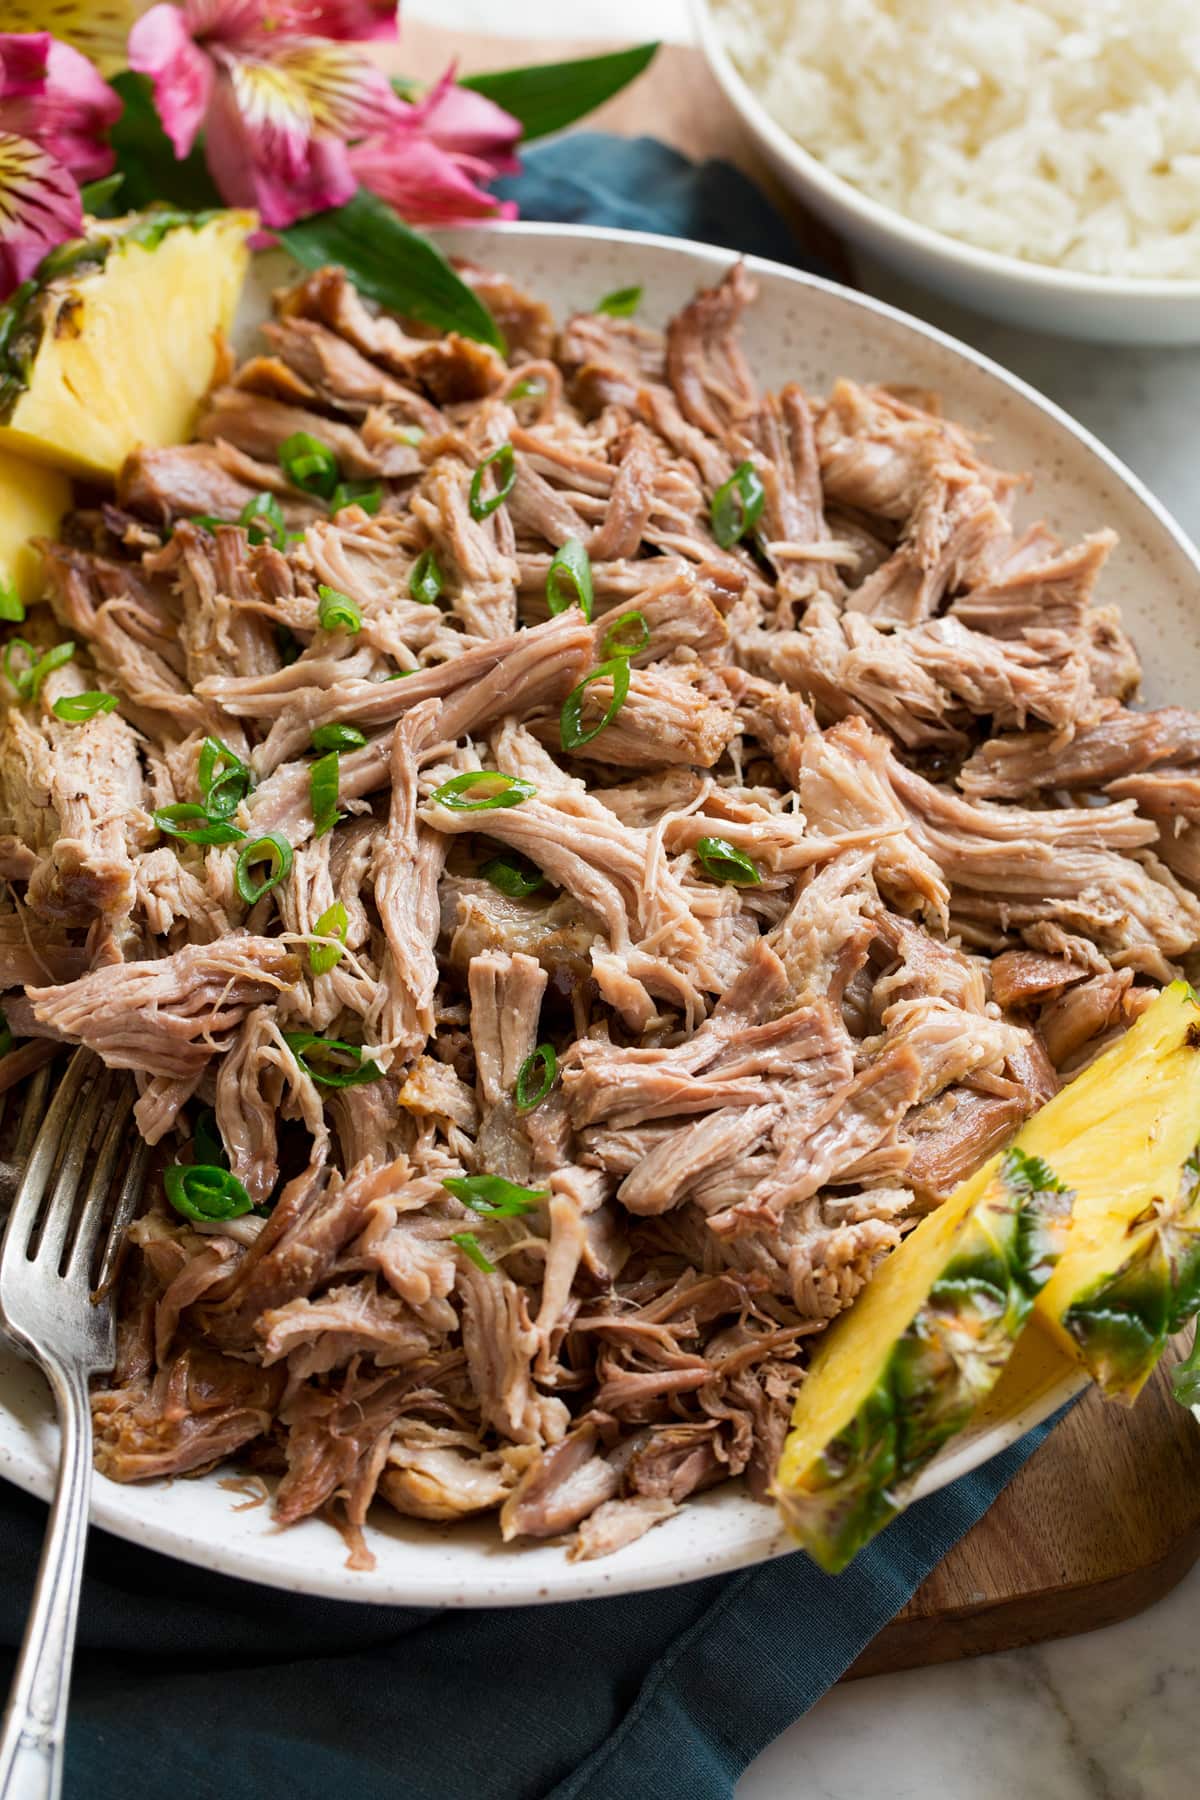 Shredded kalua pork shown from the side in a white serving bowl set over a blue napkin and wooden platter. Pineapple slices and tropical flowers are shown to the side.